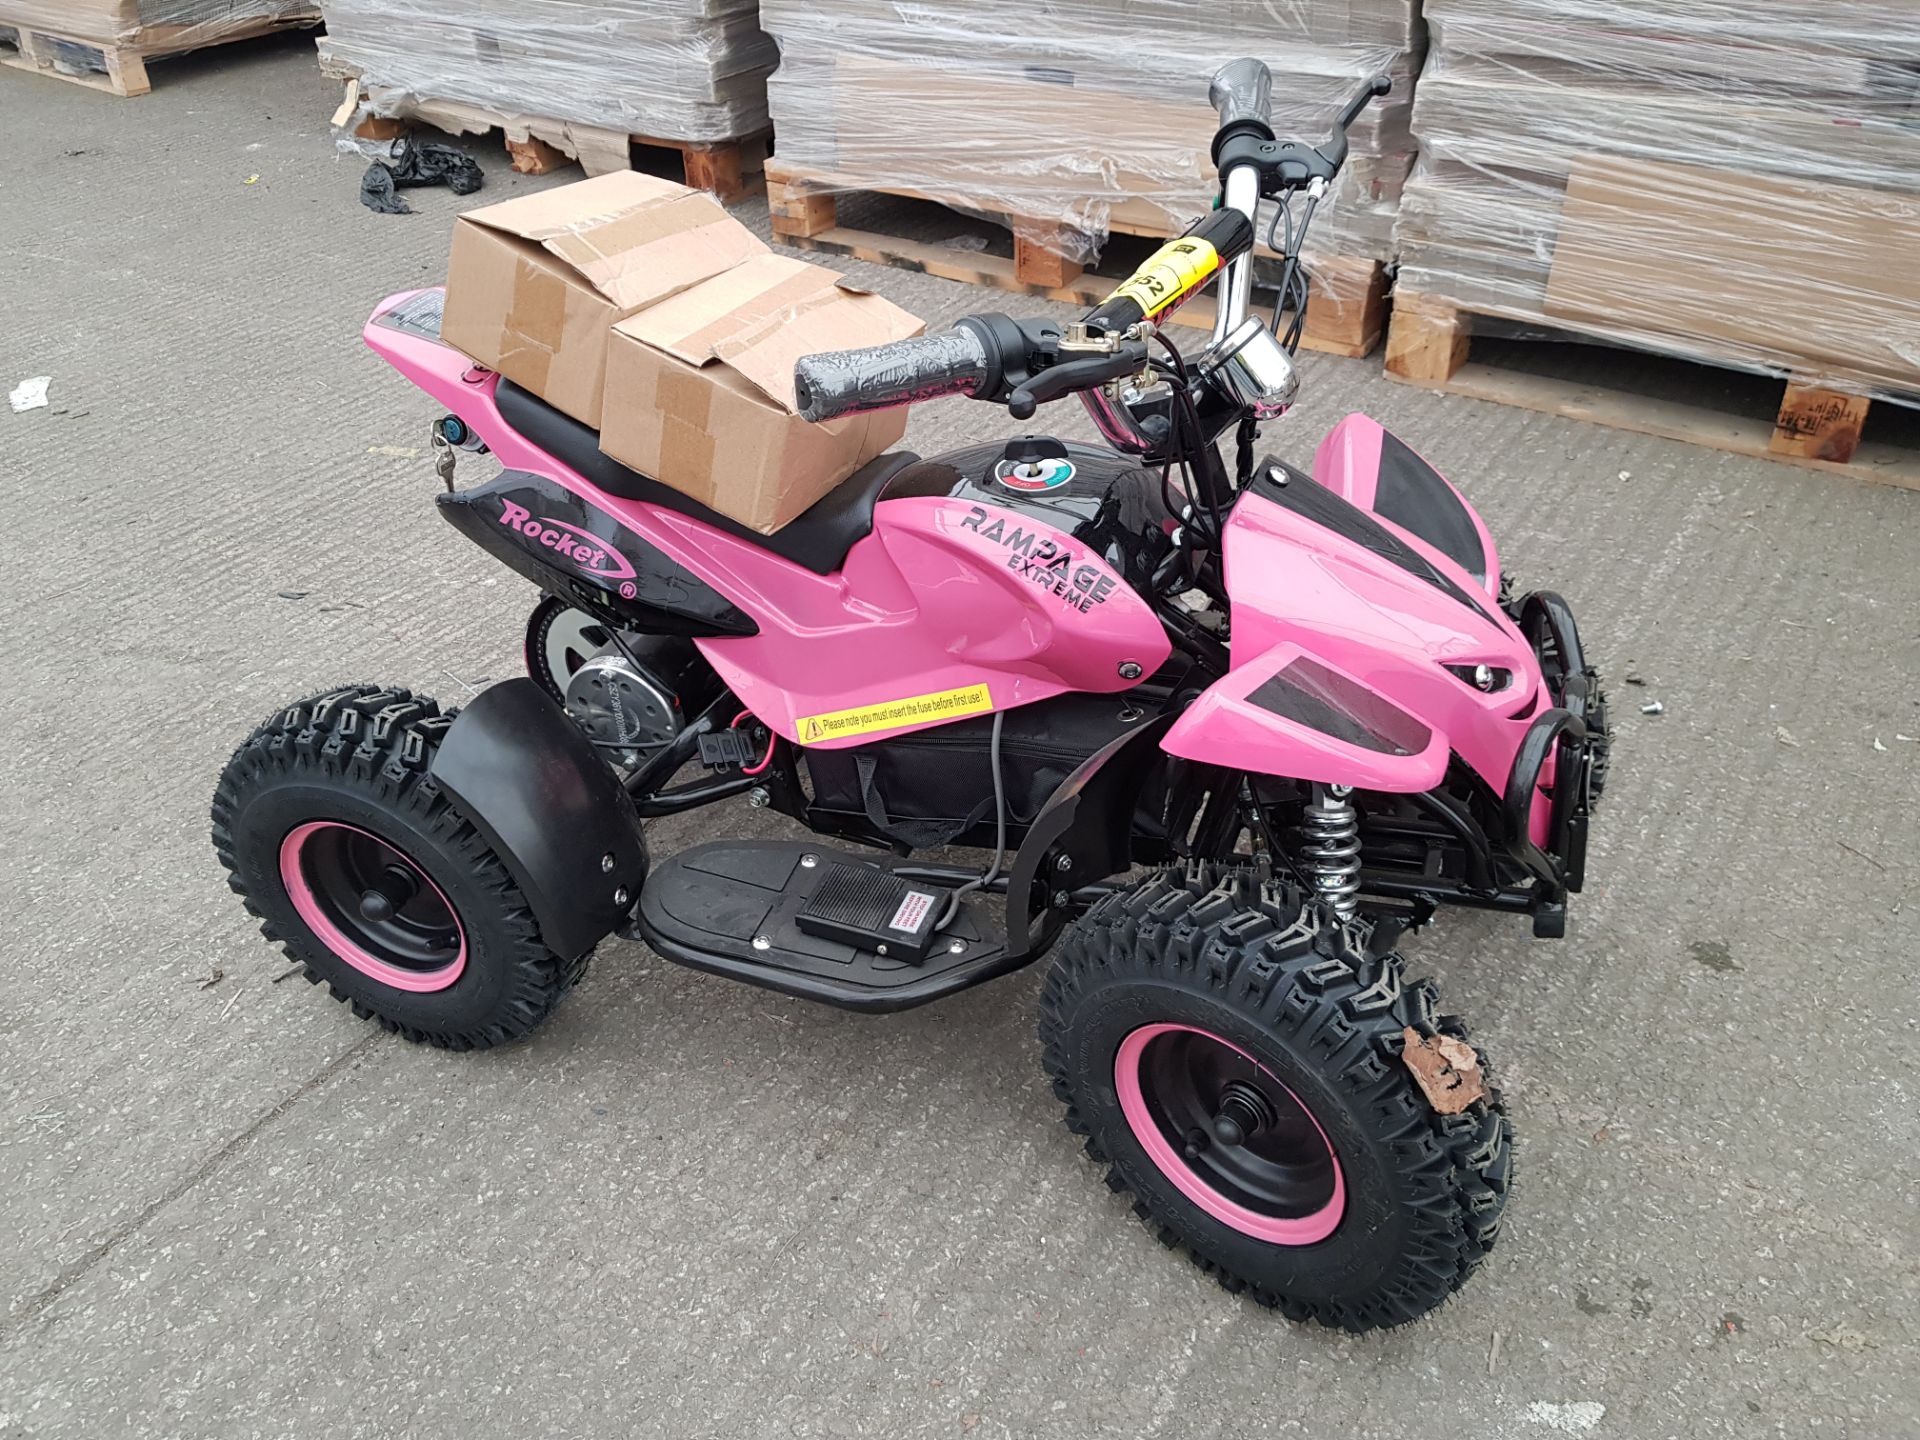 1 X RAMPAGE EXTREME ELECTRIC QUAD BIKE - IN PINK - IN 1 SEALED BOX (PLEASE NOTE THIS STOCK IS PRE